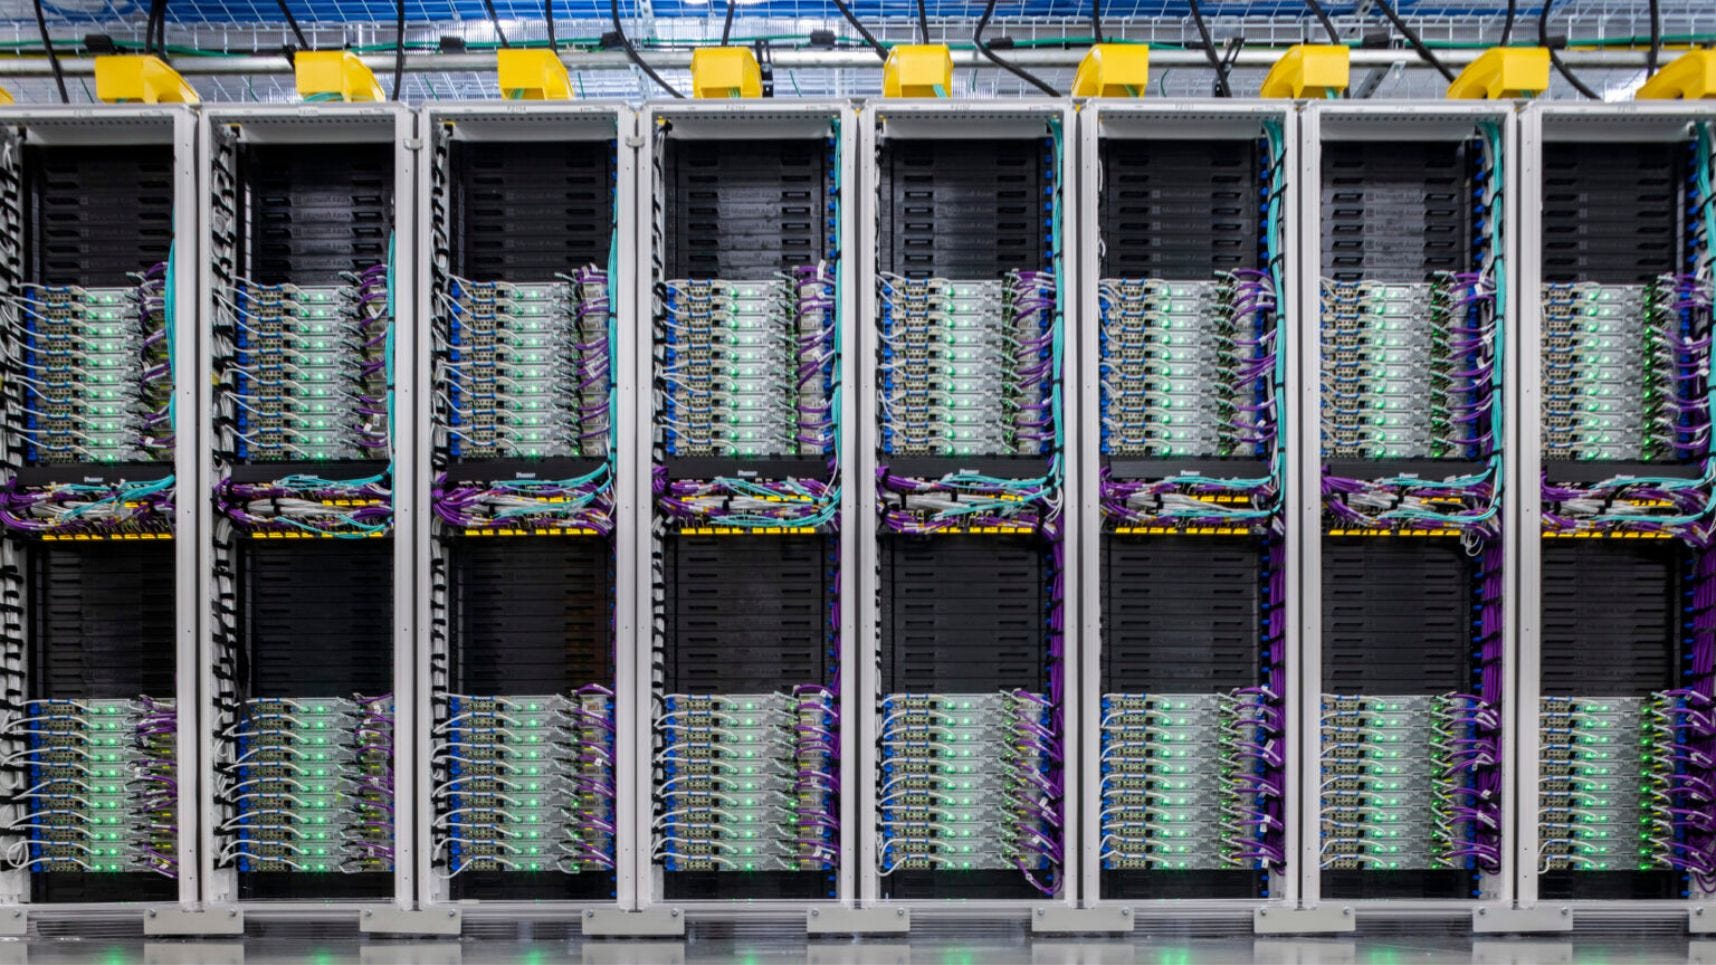 Cobalt CPUs inside Microsoft’s data center in Quincy, Washington. The chips are built on Arm architecture and are optimized for greater efficiency and performance in cloud native offerings